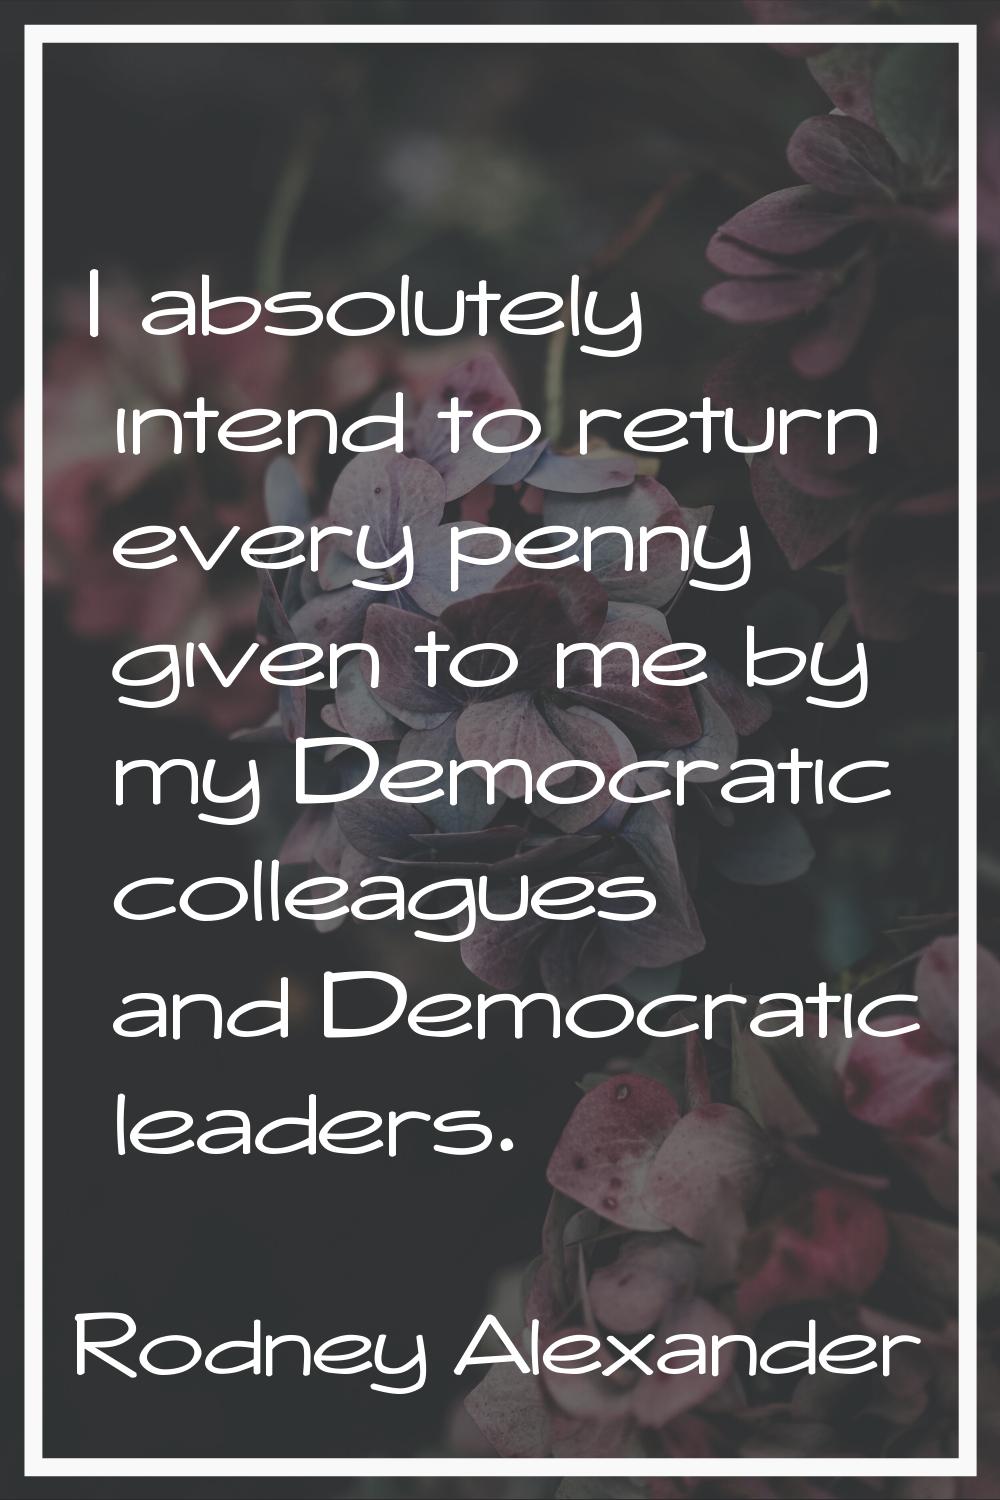 I absolutely intend to return every penny given to me by my Democratic colleagues and Democratic le